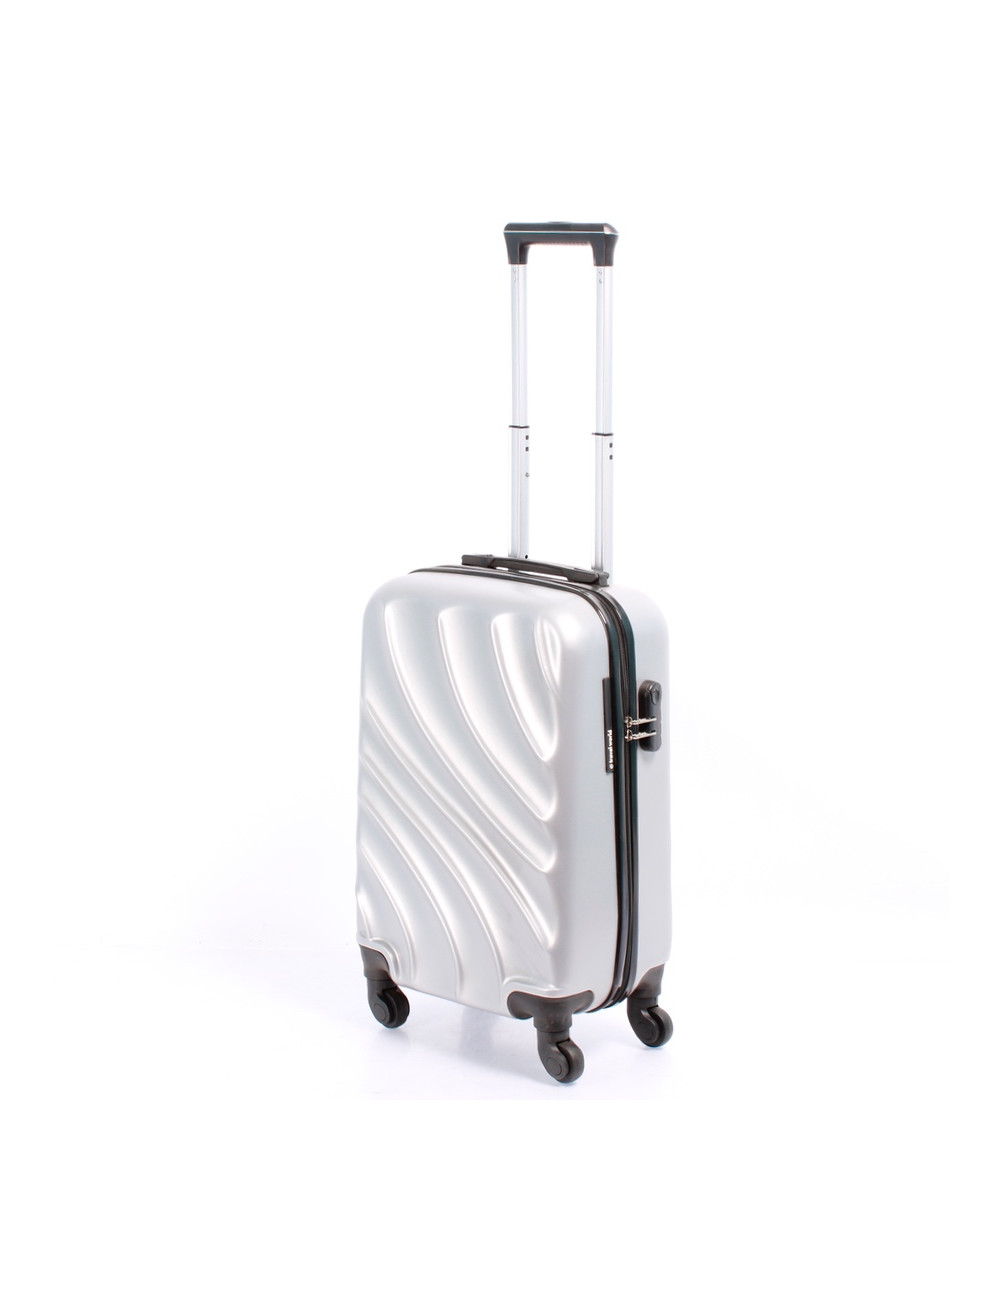 VALISE CABINE RIGIDE SAC BAGAGE A MAIN TROLLEY LOW COST AVION TRAIN